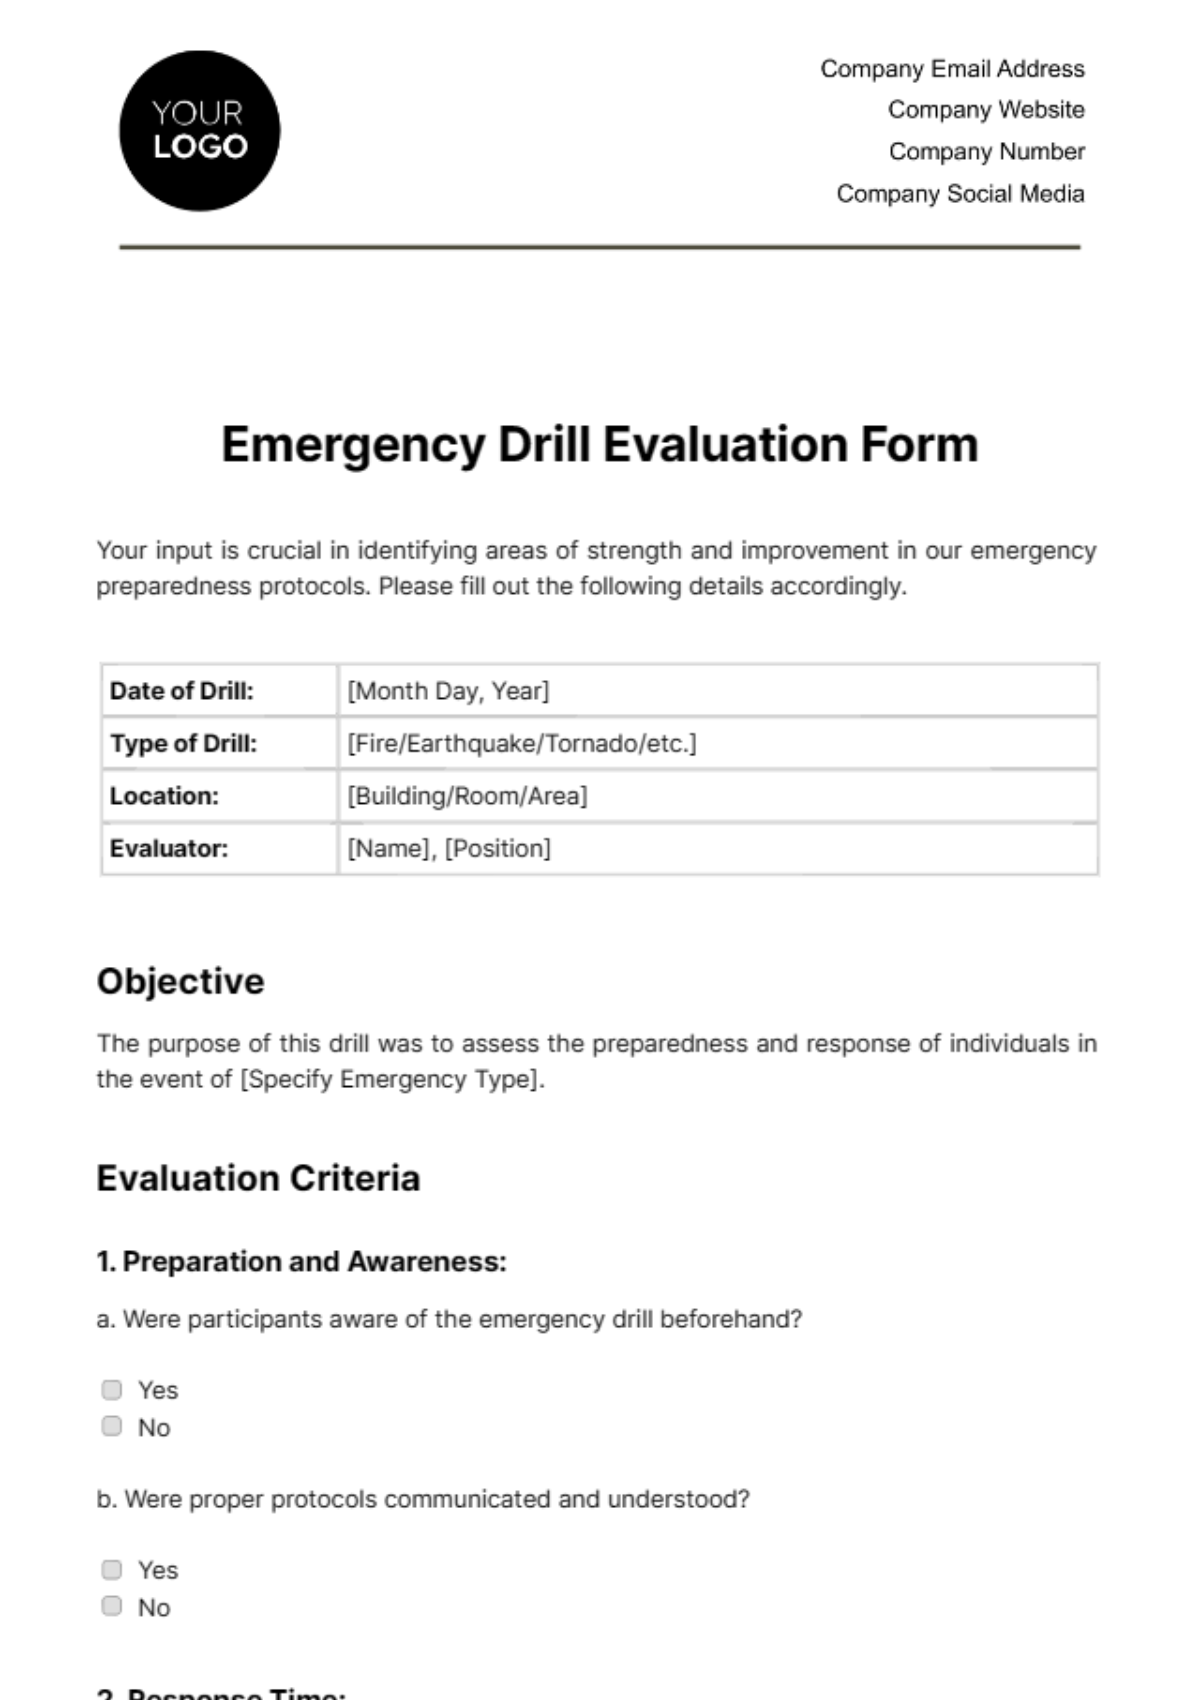 Emergency Drill Evaluation Form Template